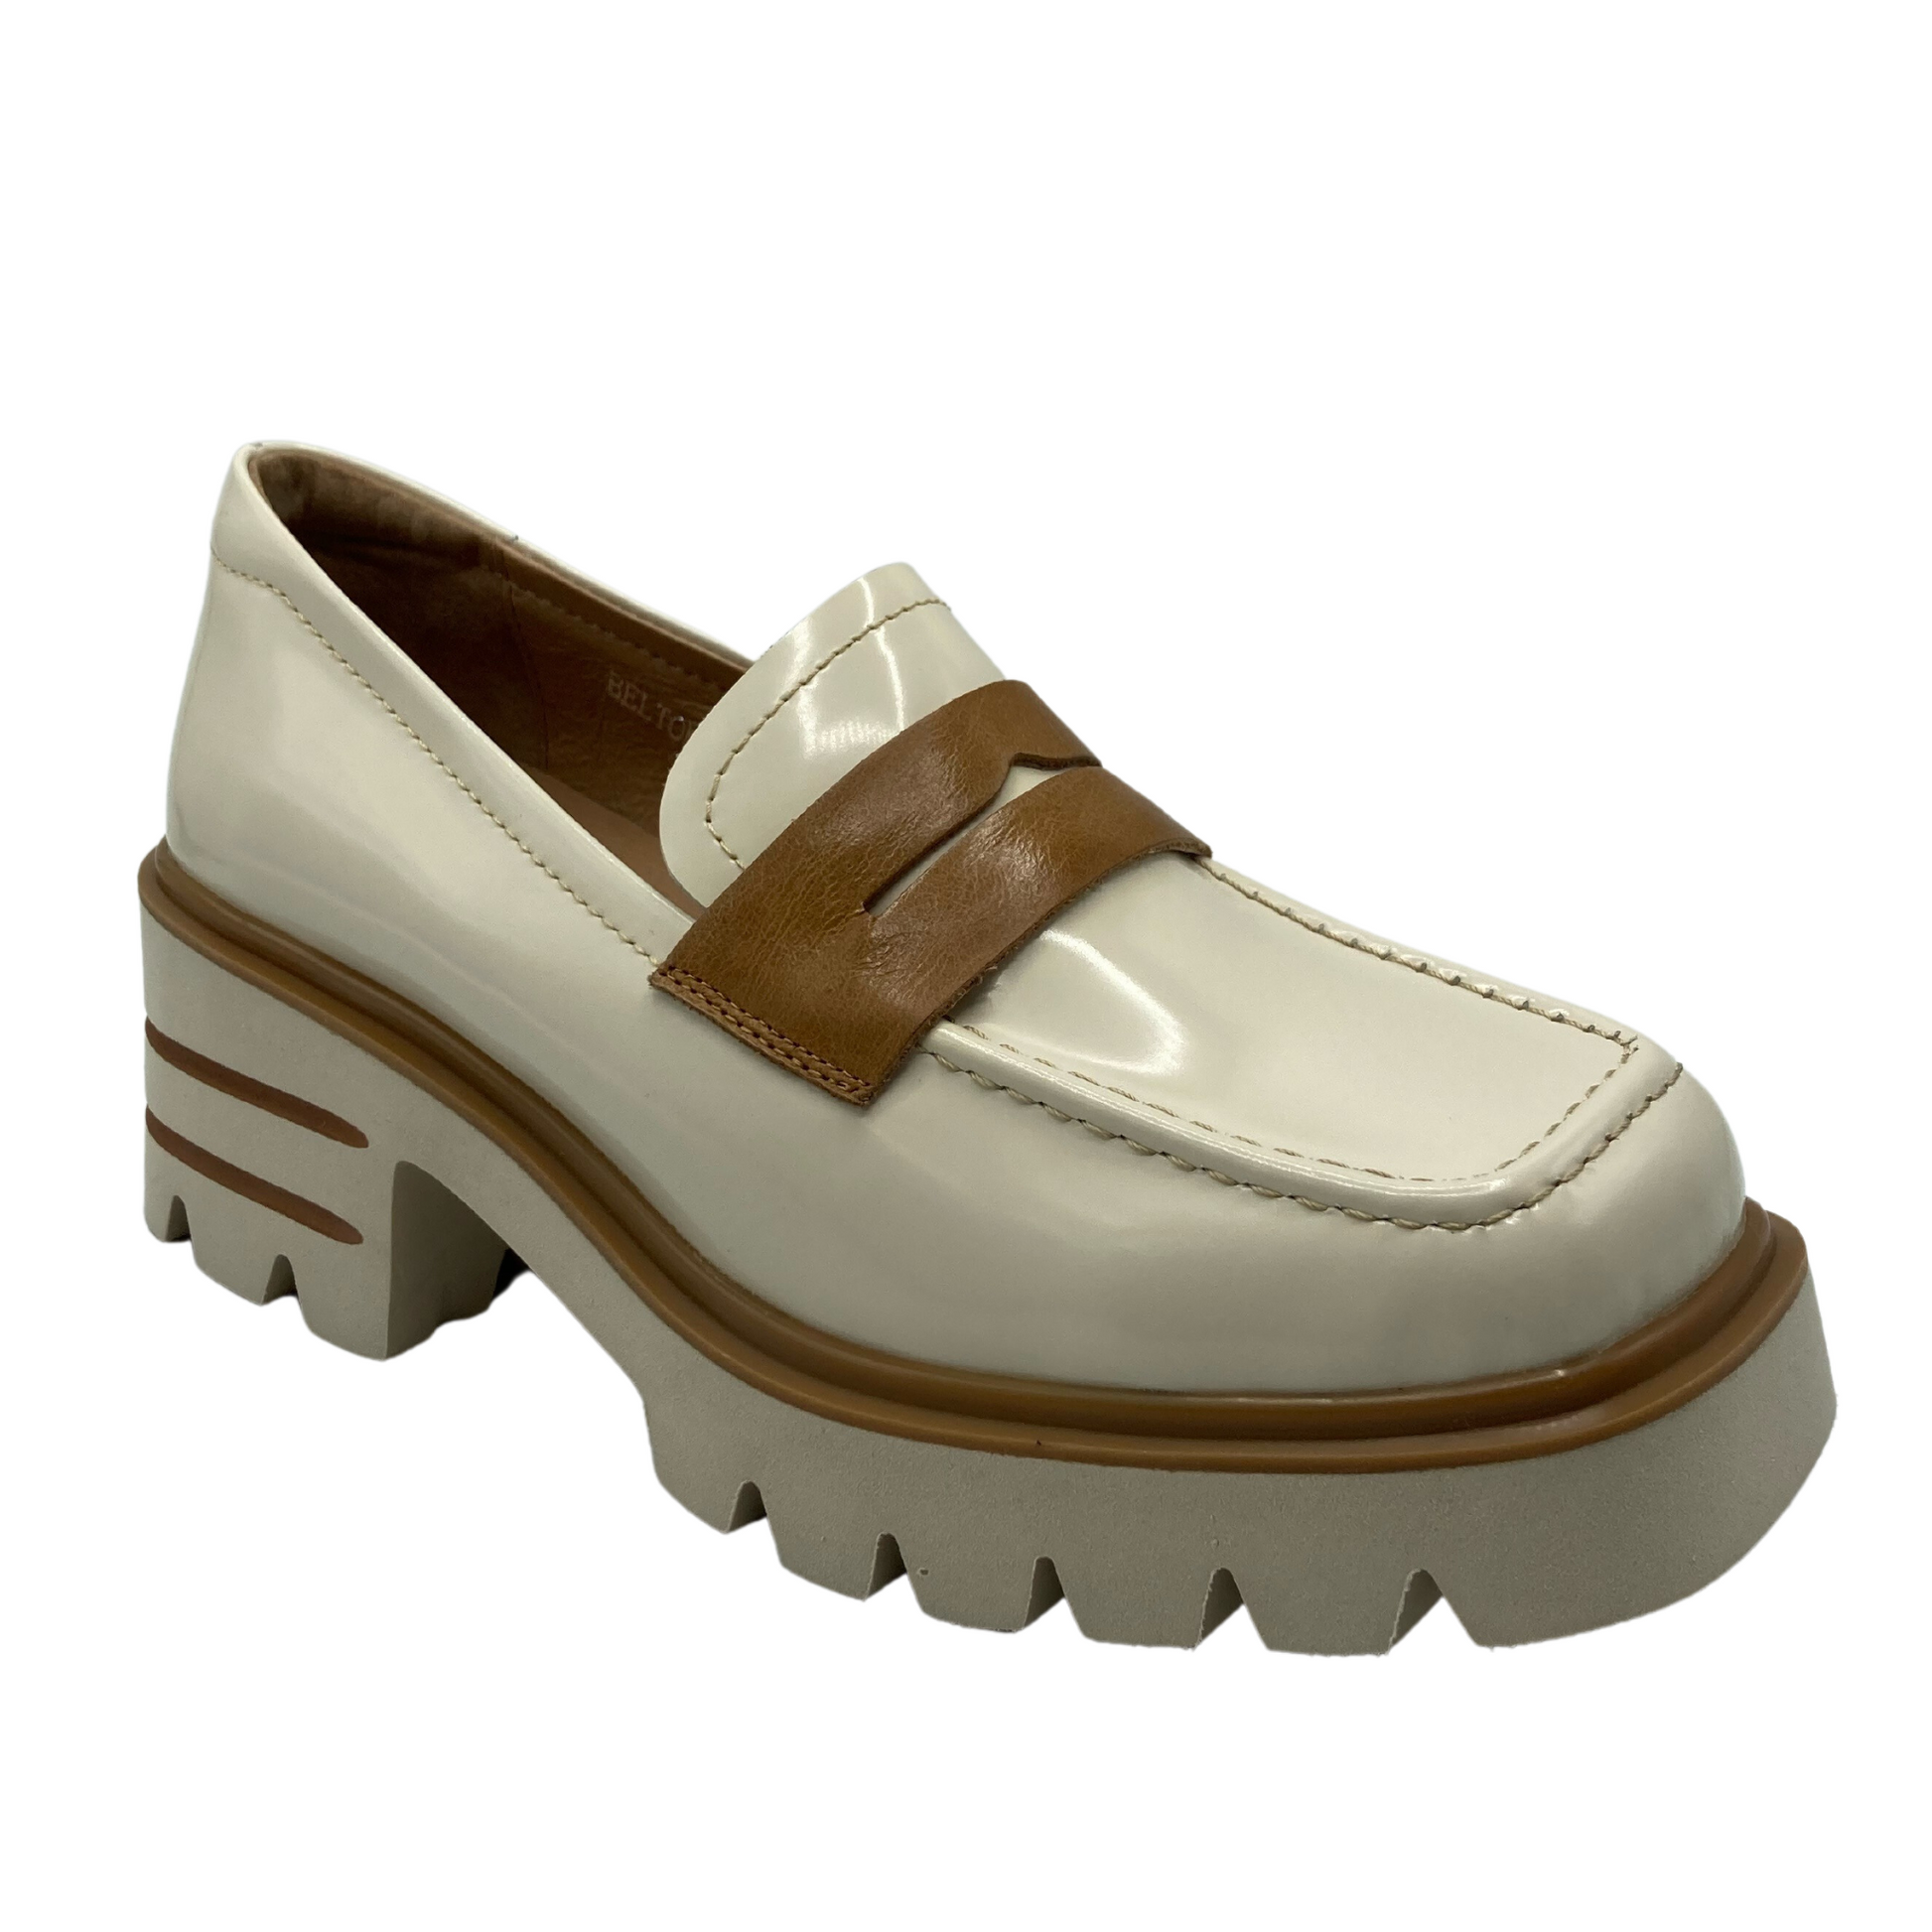 45 degree angled view of vanilla and tan coloured leather loafer with a square toe